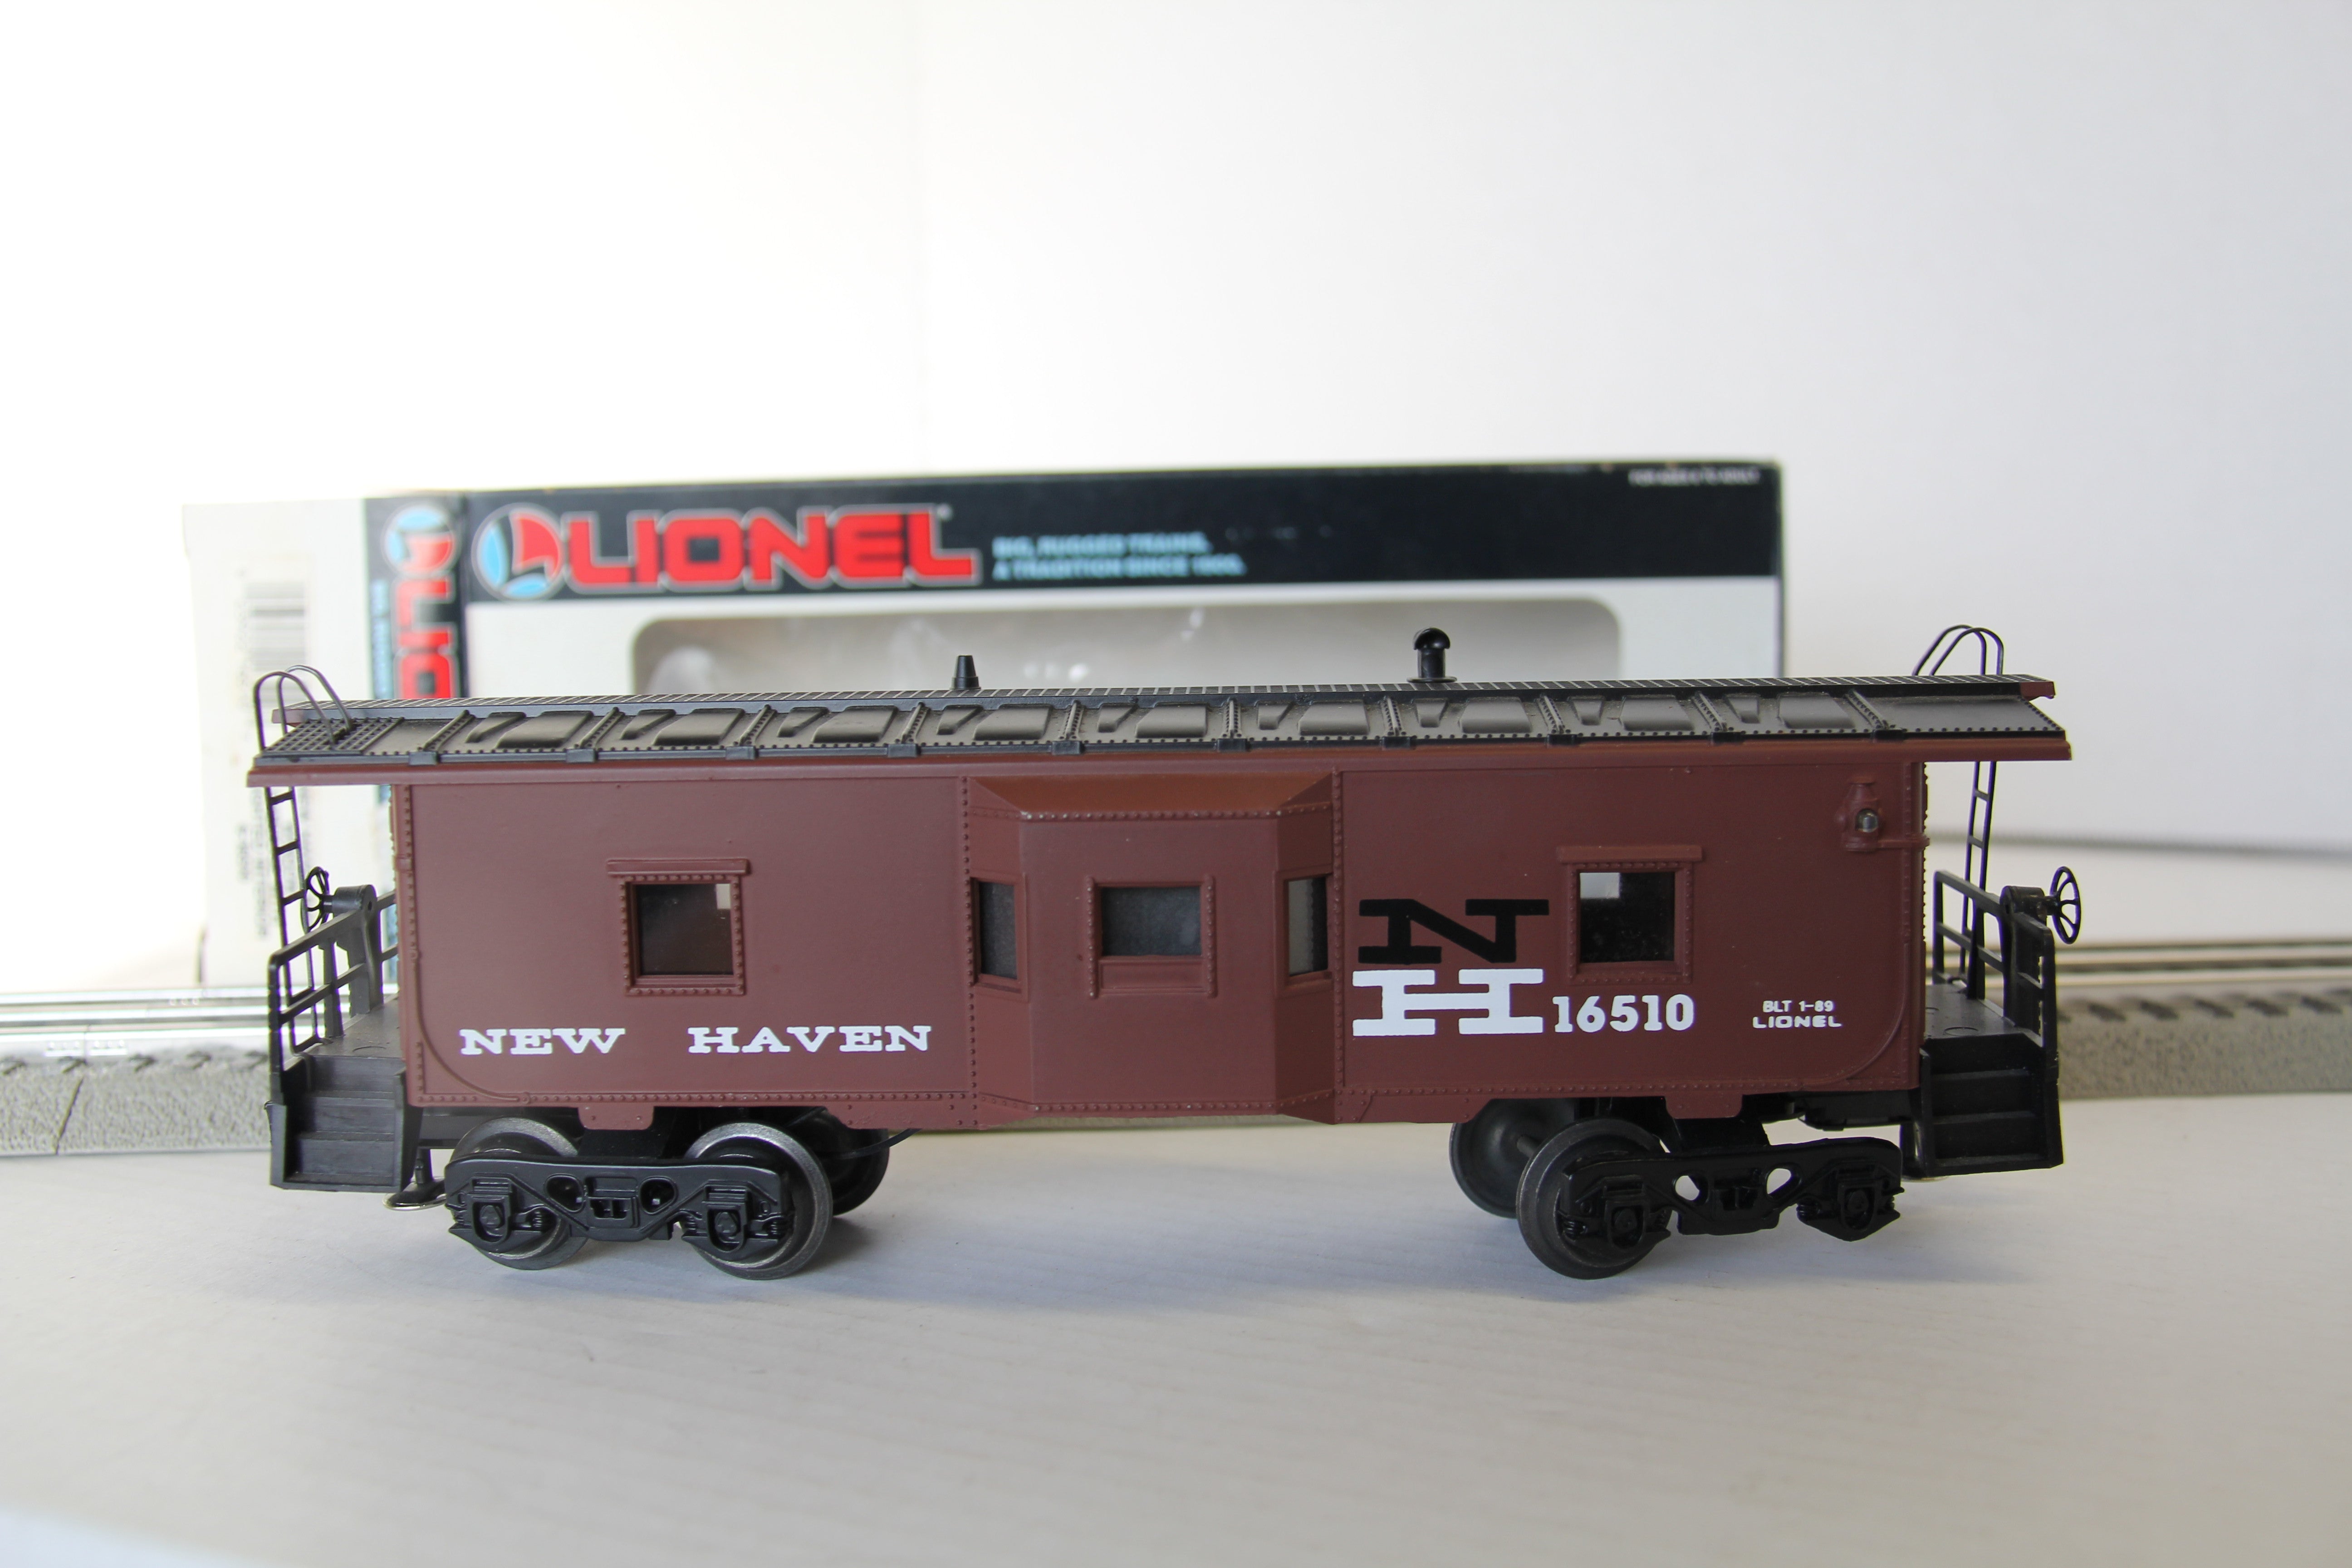 Lionel 6-16510 New Haven Bay Window Caboose with Lighted Interior-Second hand-M4035